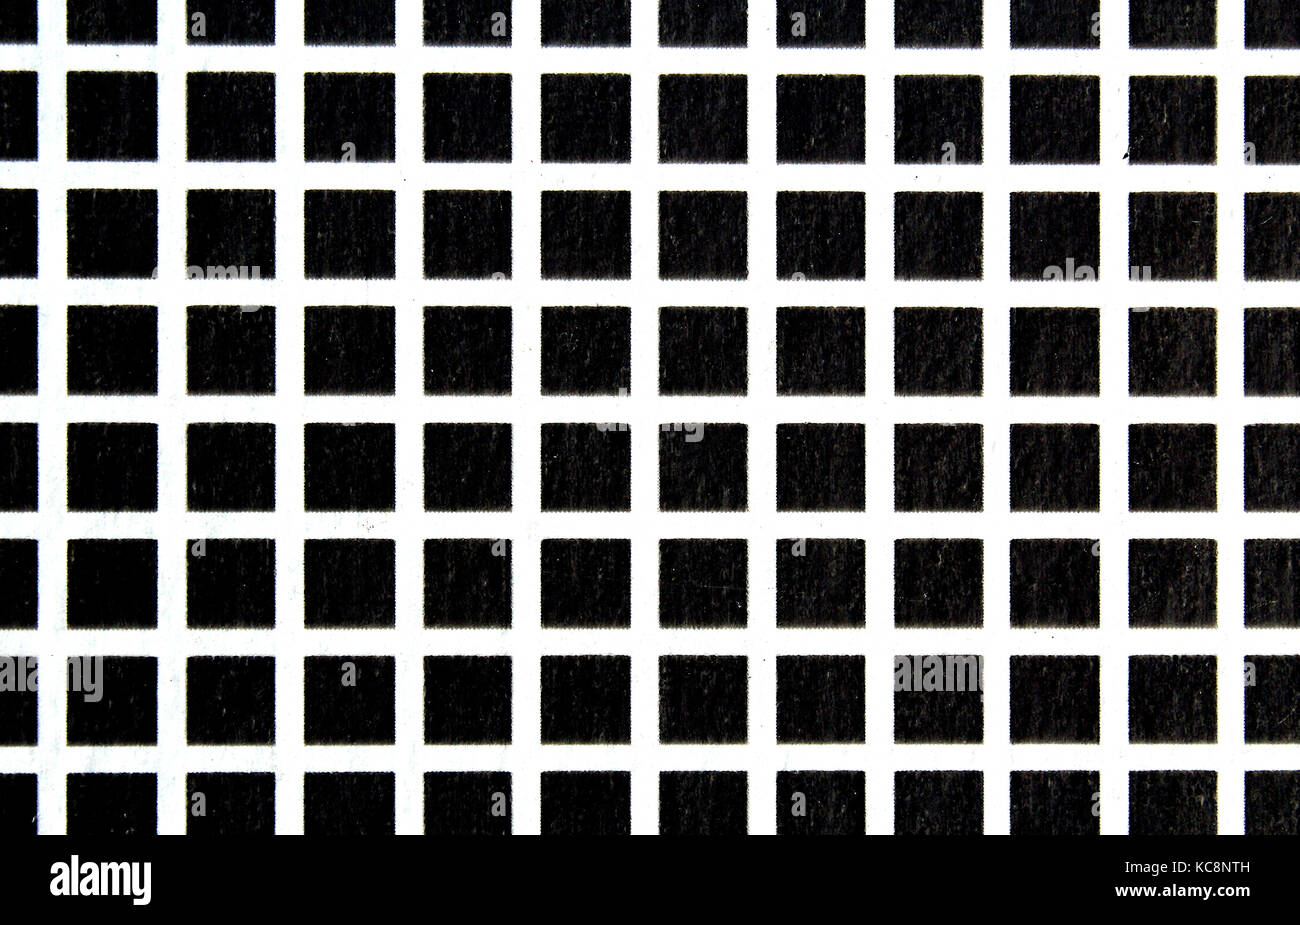 Pile of Quilting Squares Background Stock Photo - Image of squares, black:  119043782